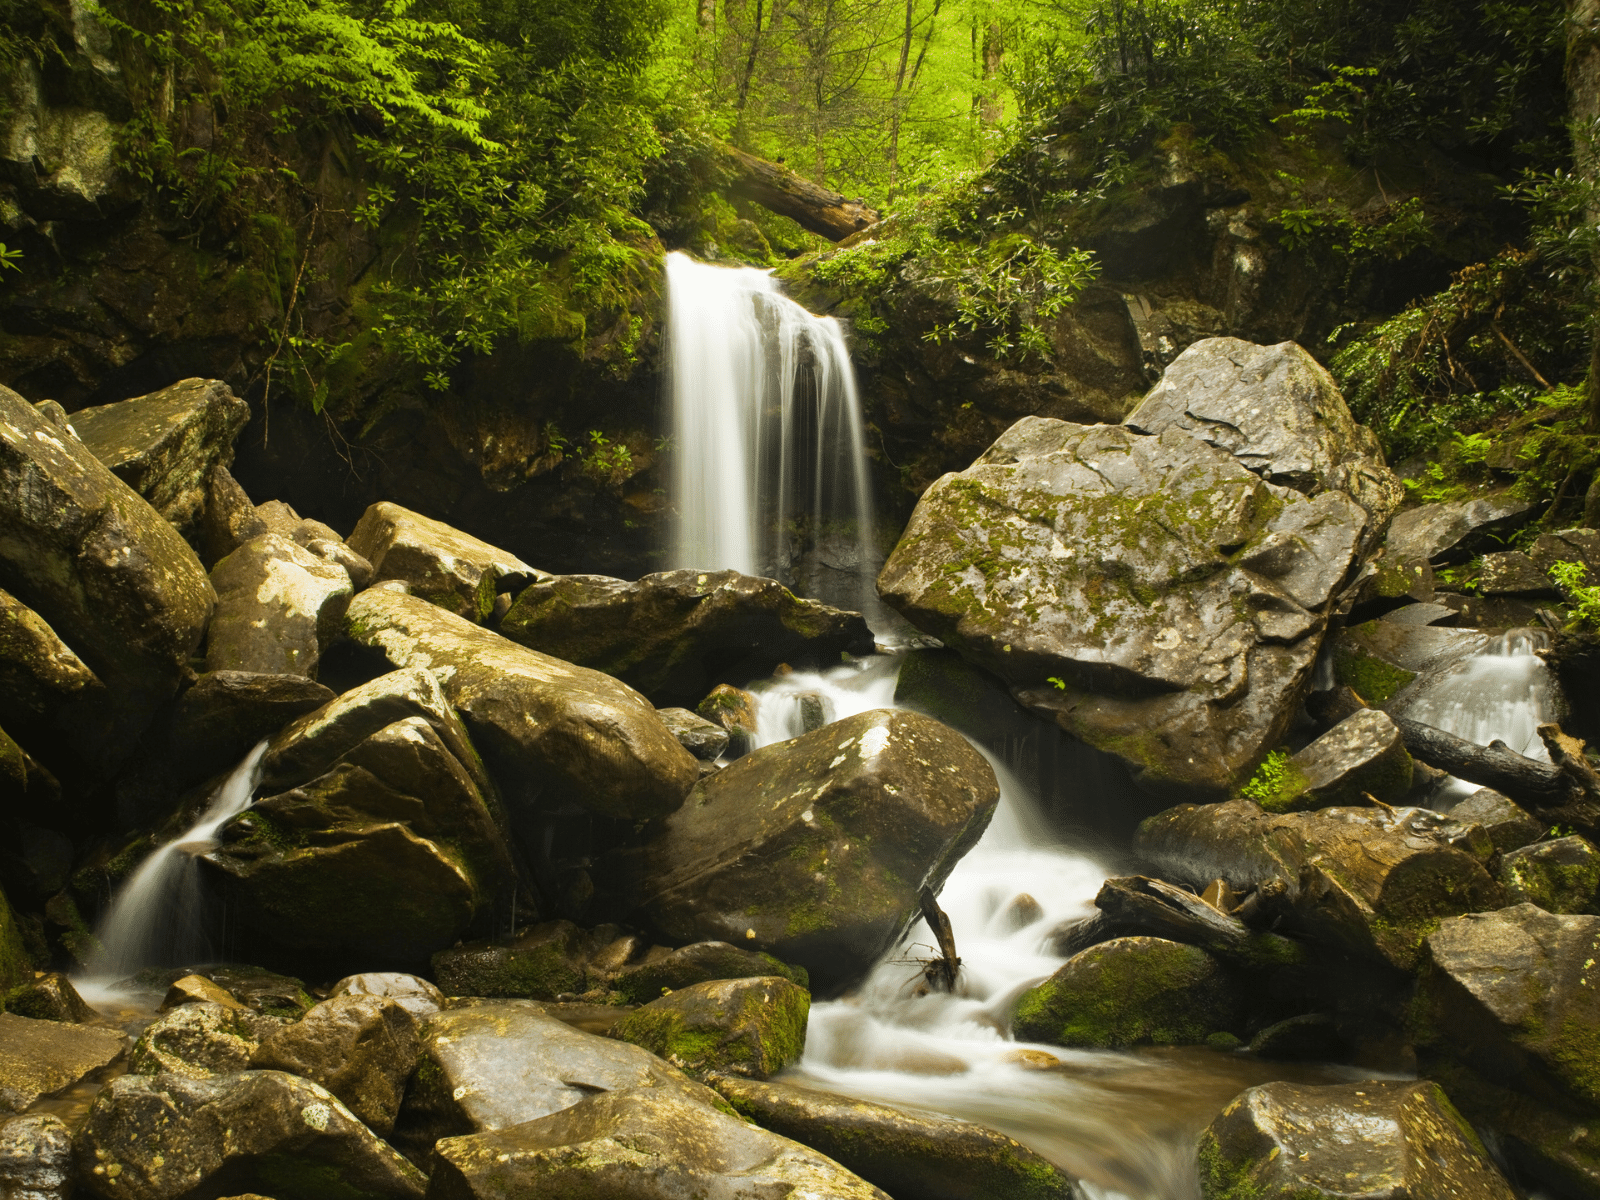 3 Incredible Gatlinburg Waterfalls to See on Your Next Hike in the Great Smoky Mountains